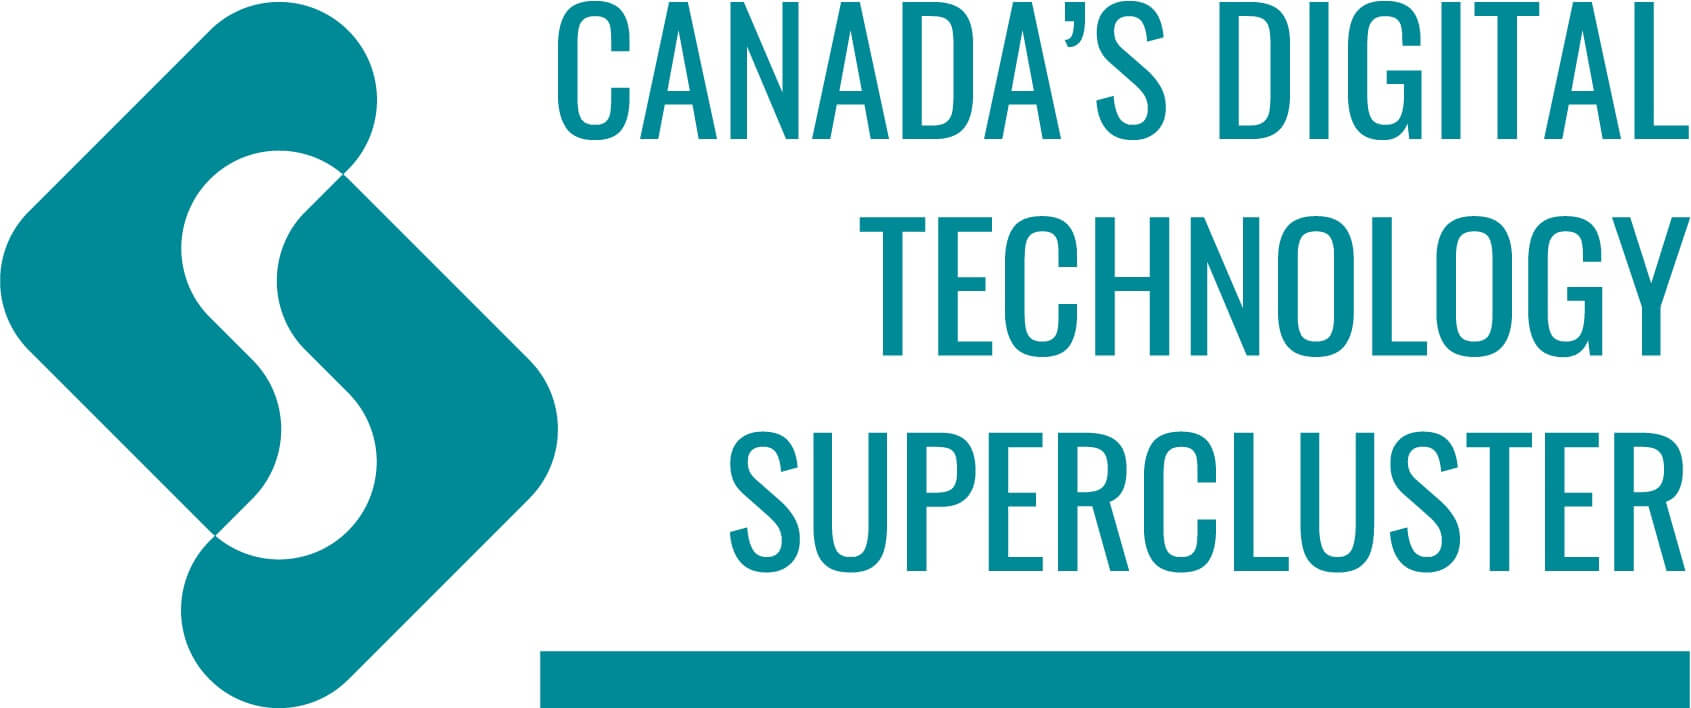 Canada's Digital Technology Supercluster logo with teal icon and font text